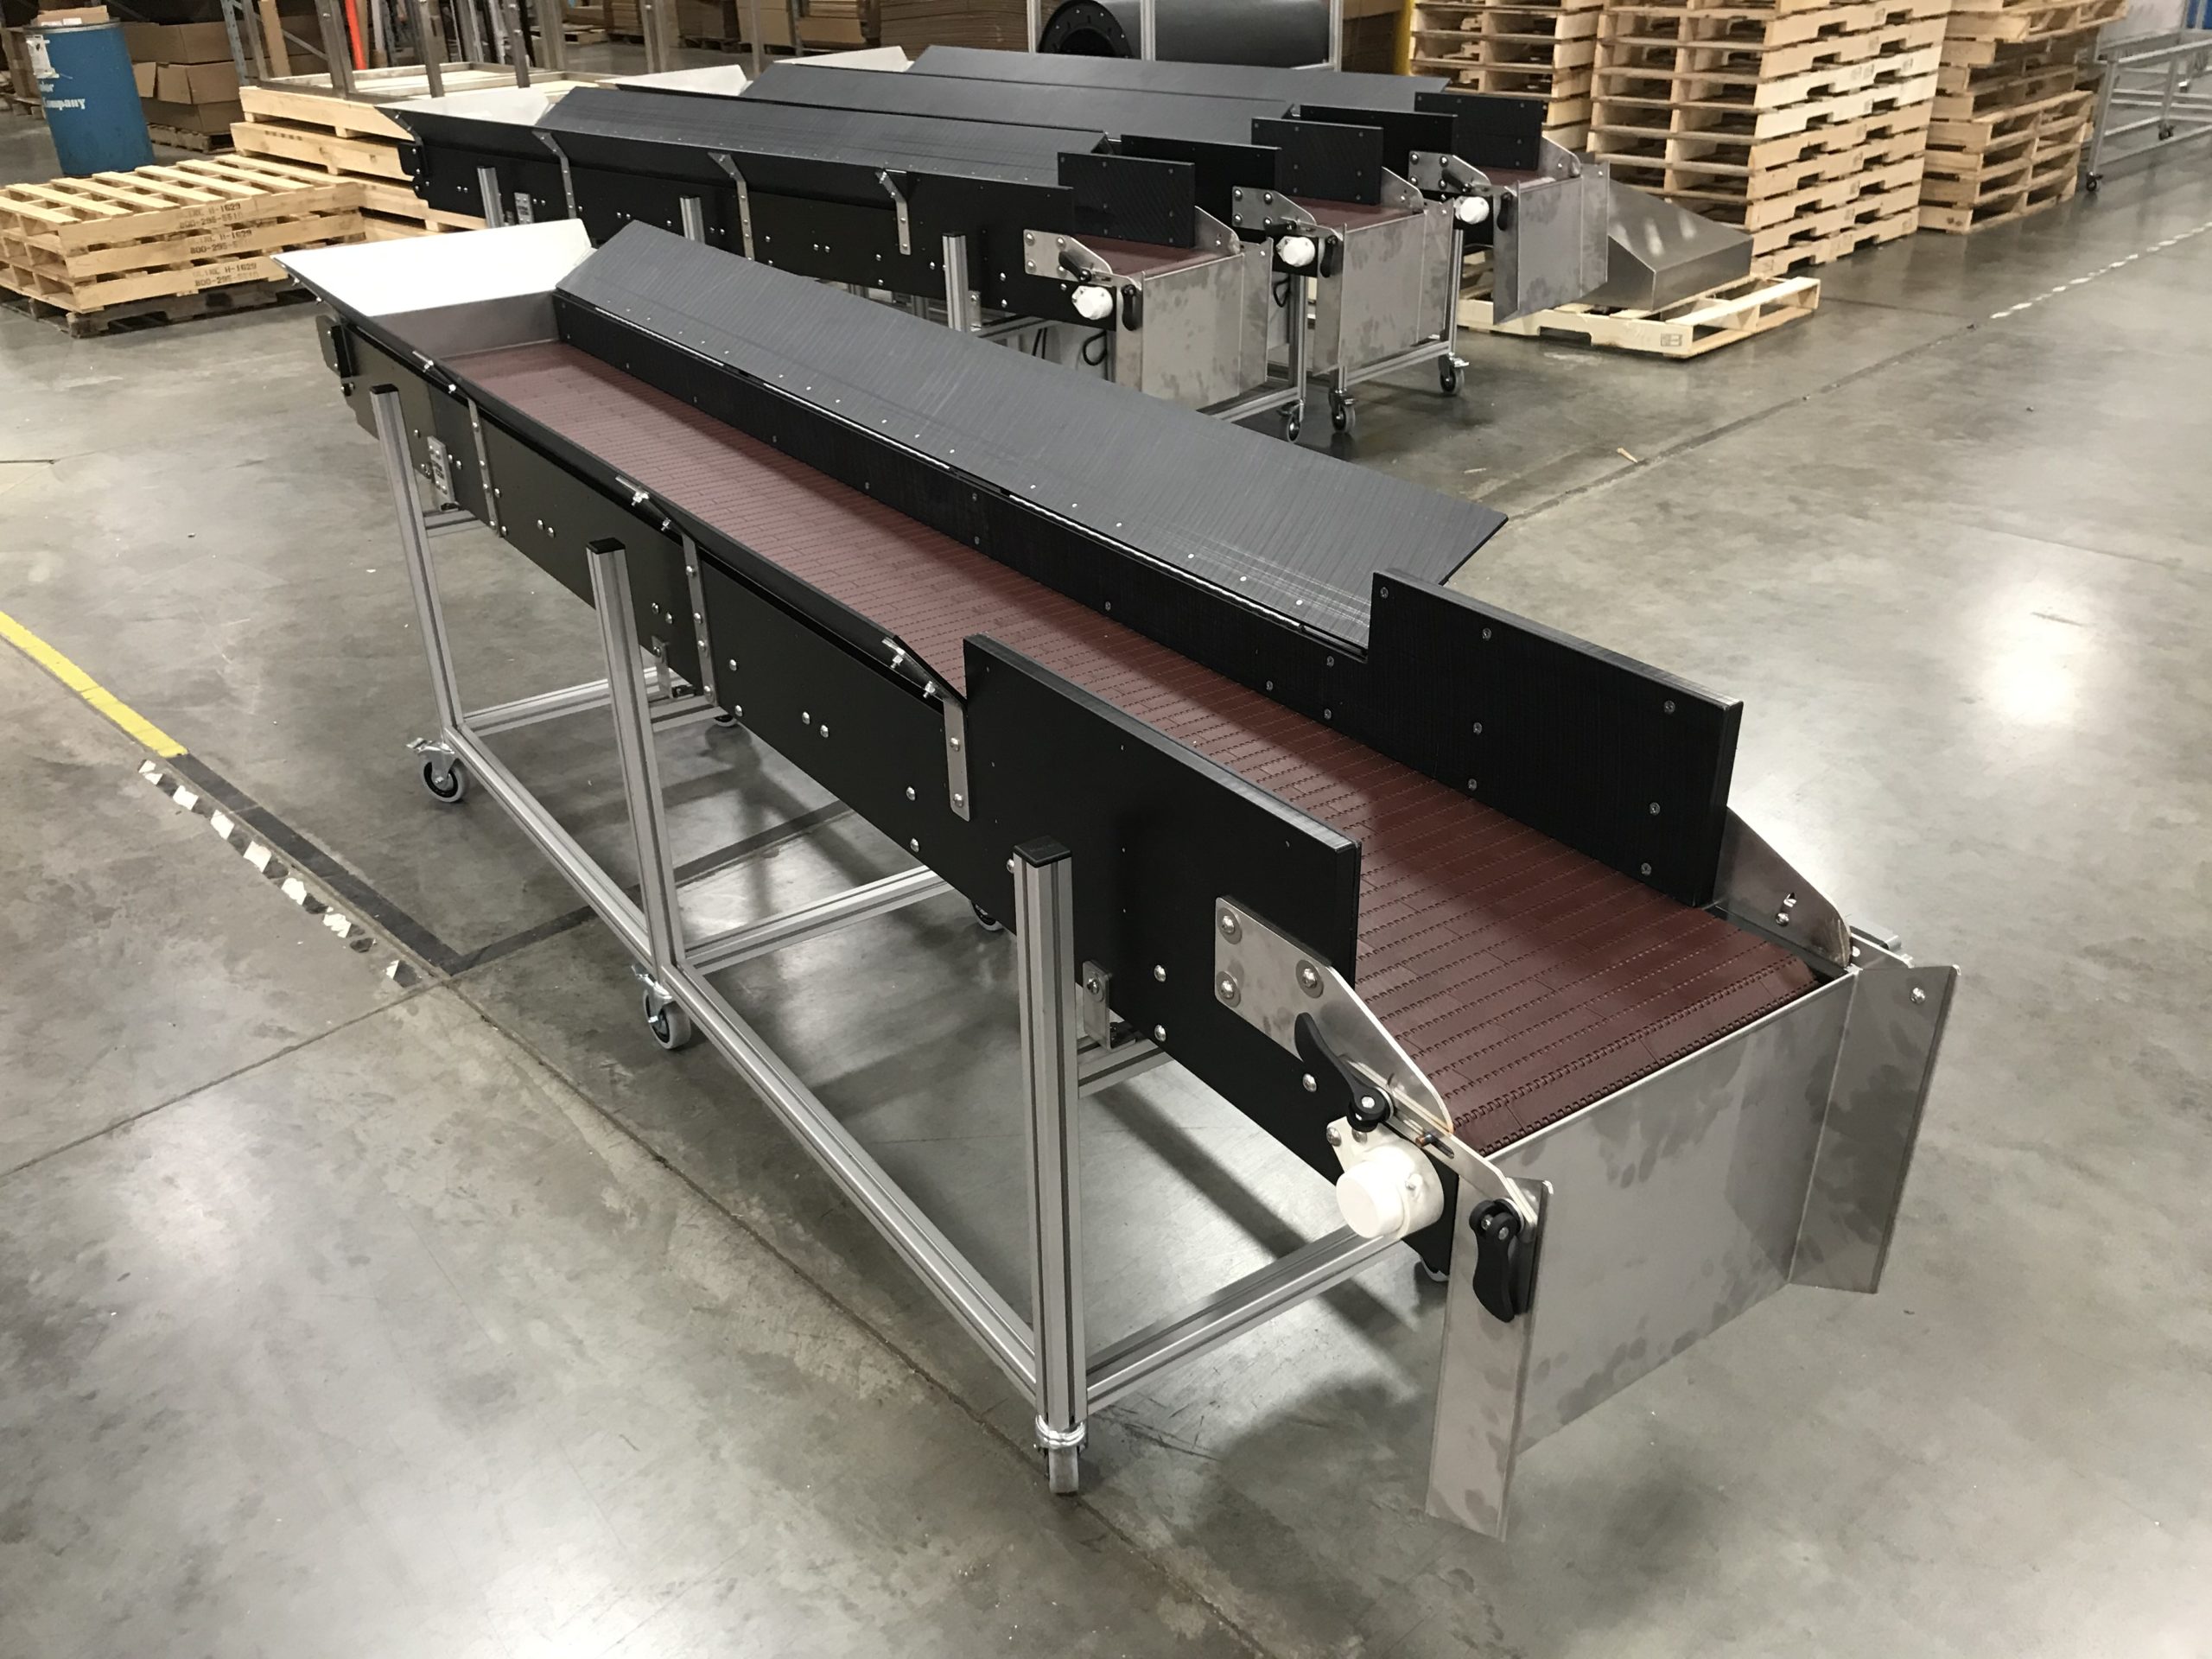 New Conveyor Developed for Plastic Blow Molding Machines